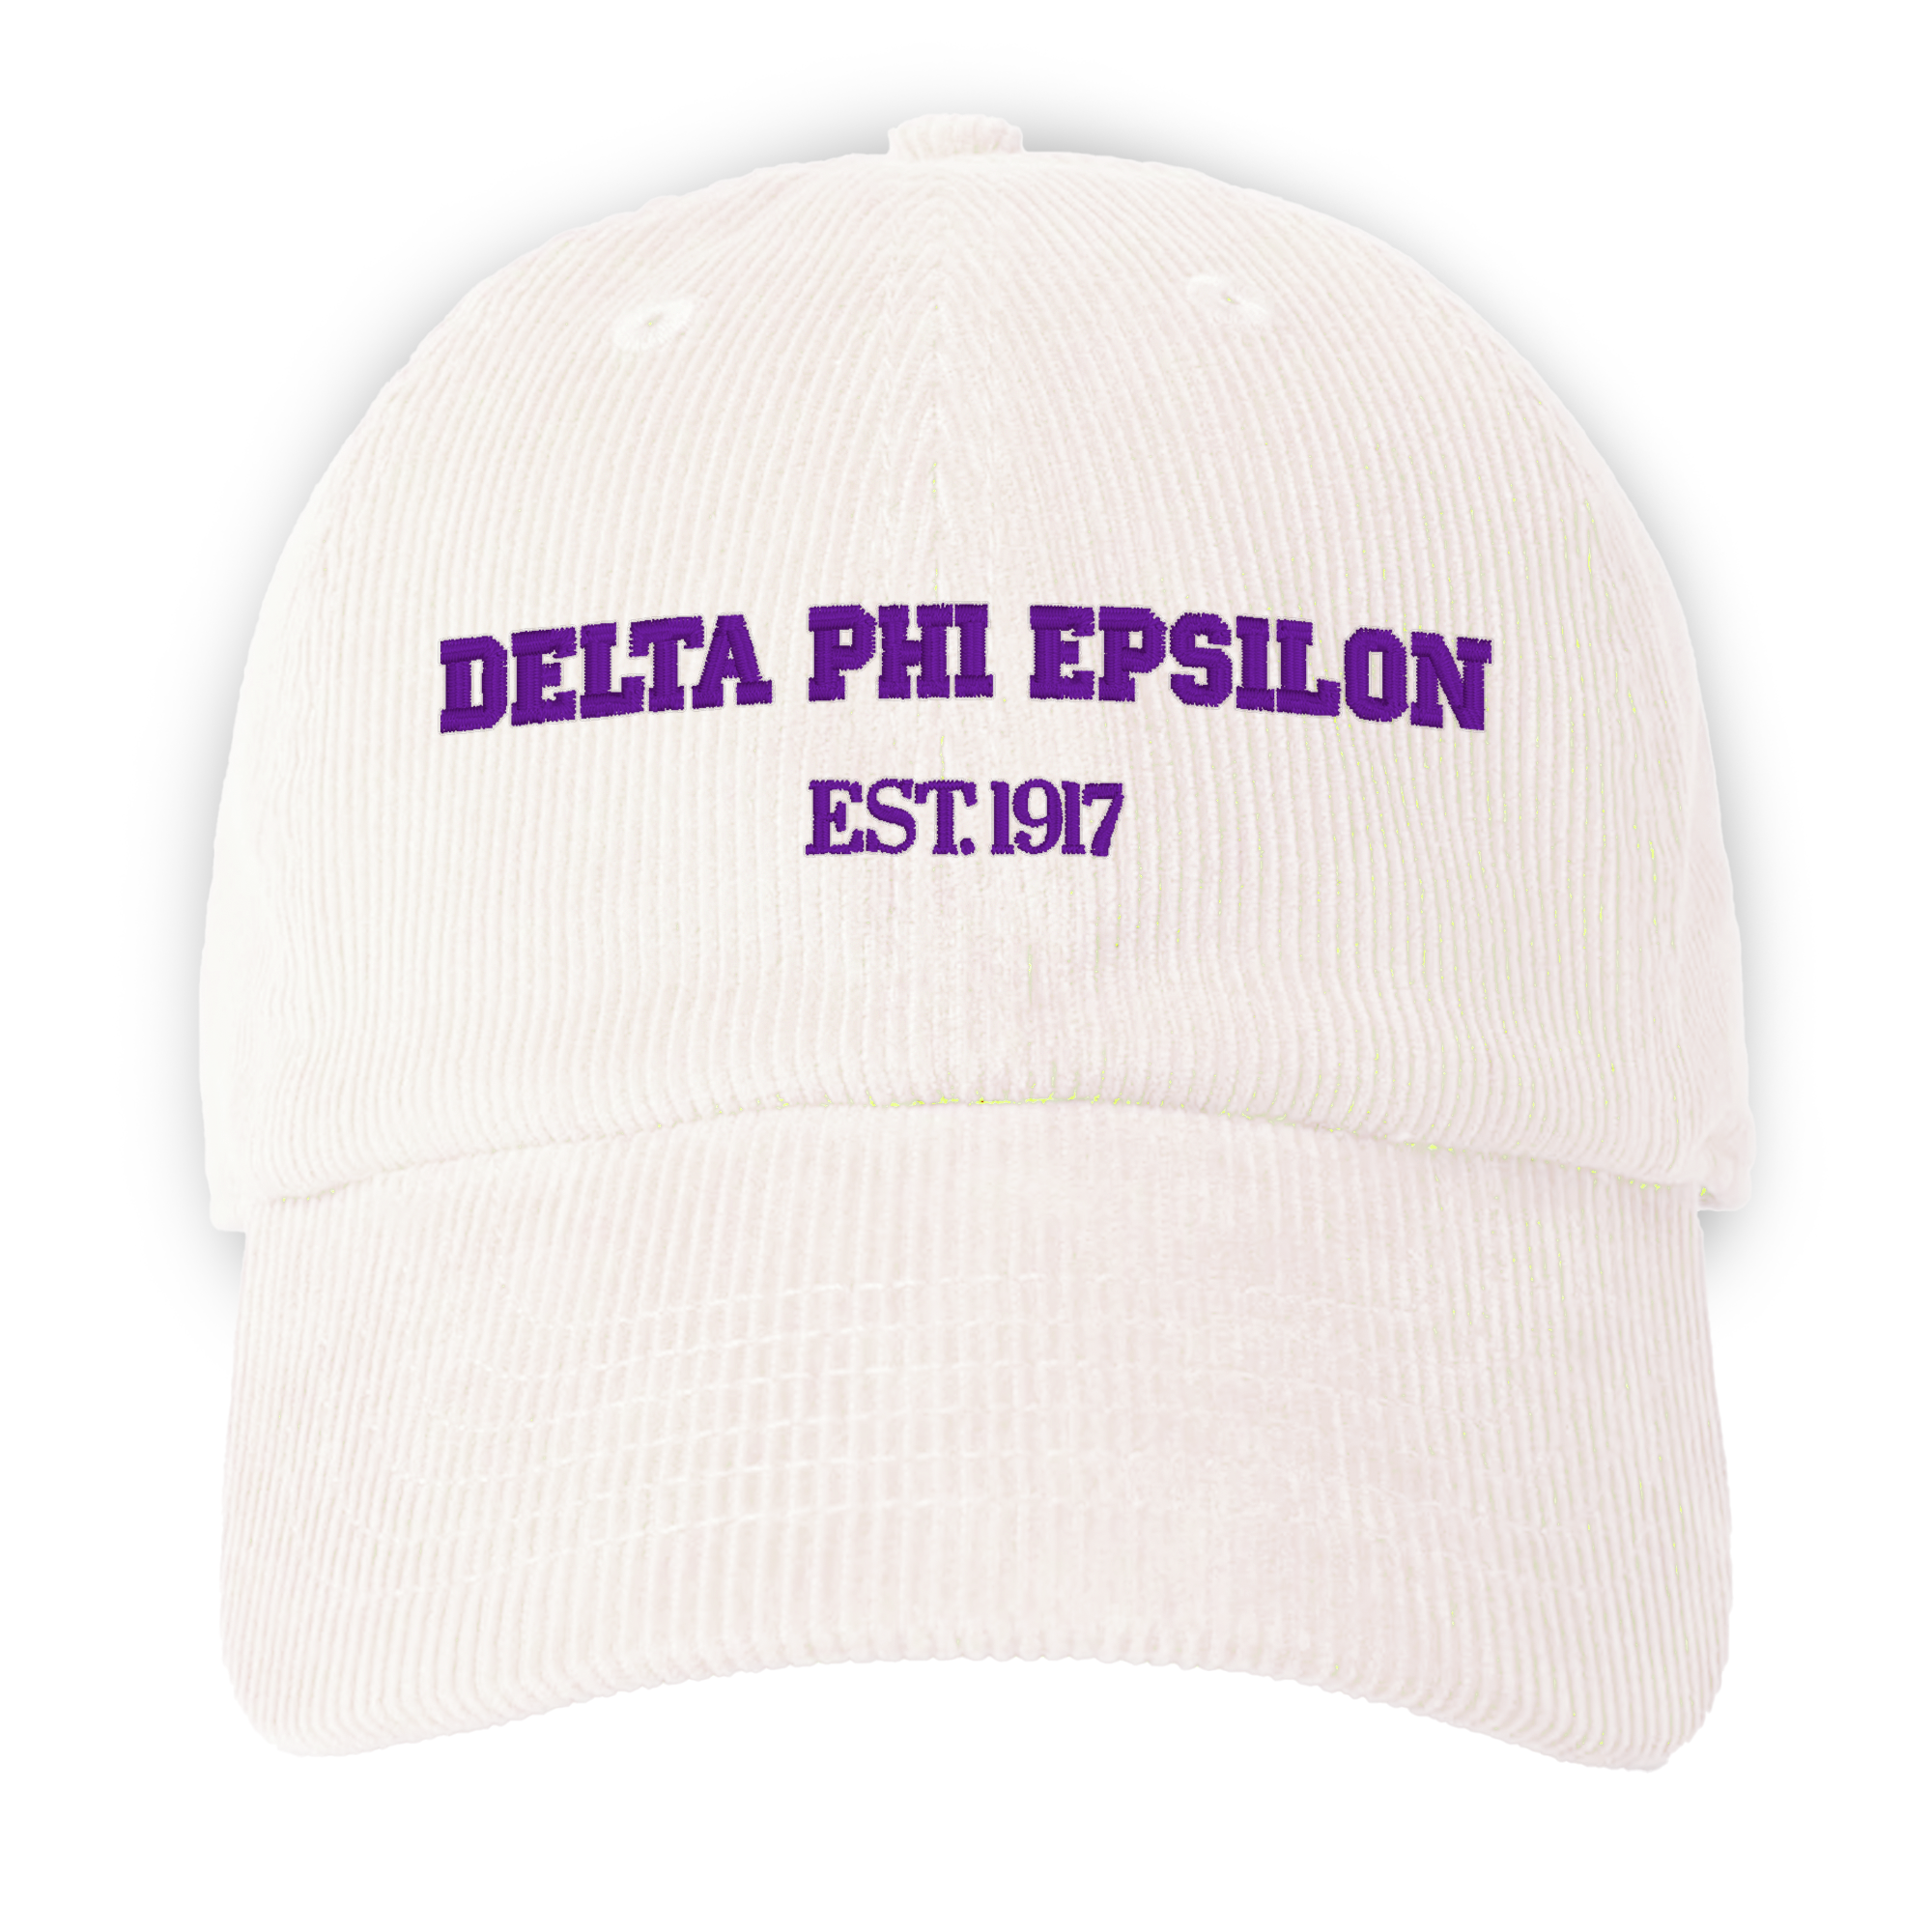 a white hat with the delta phi epsilon est 1017 embroidered on it